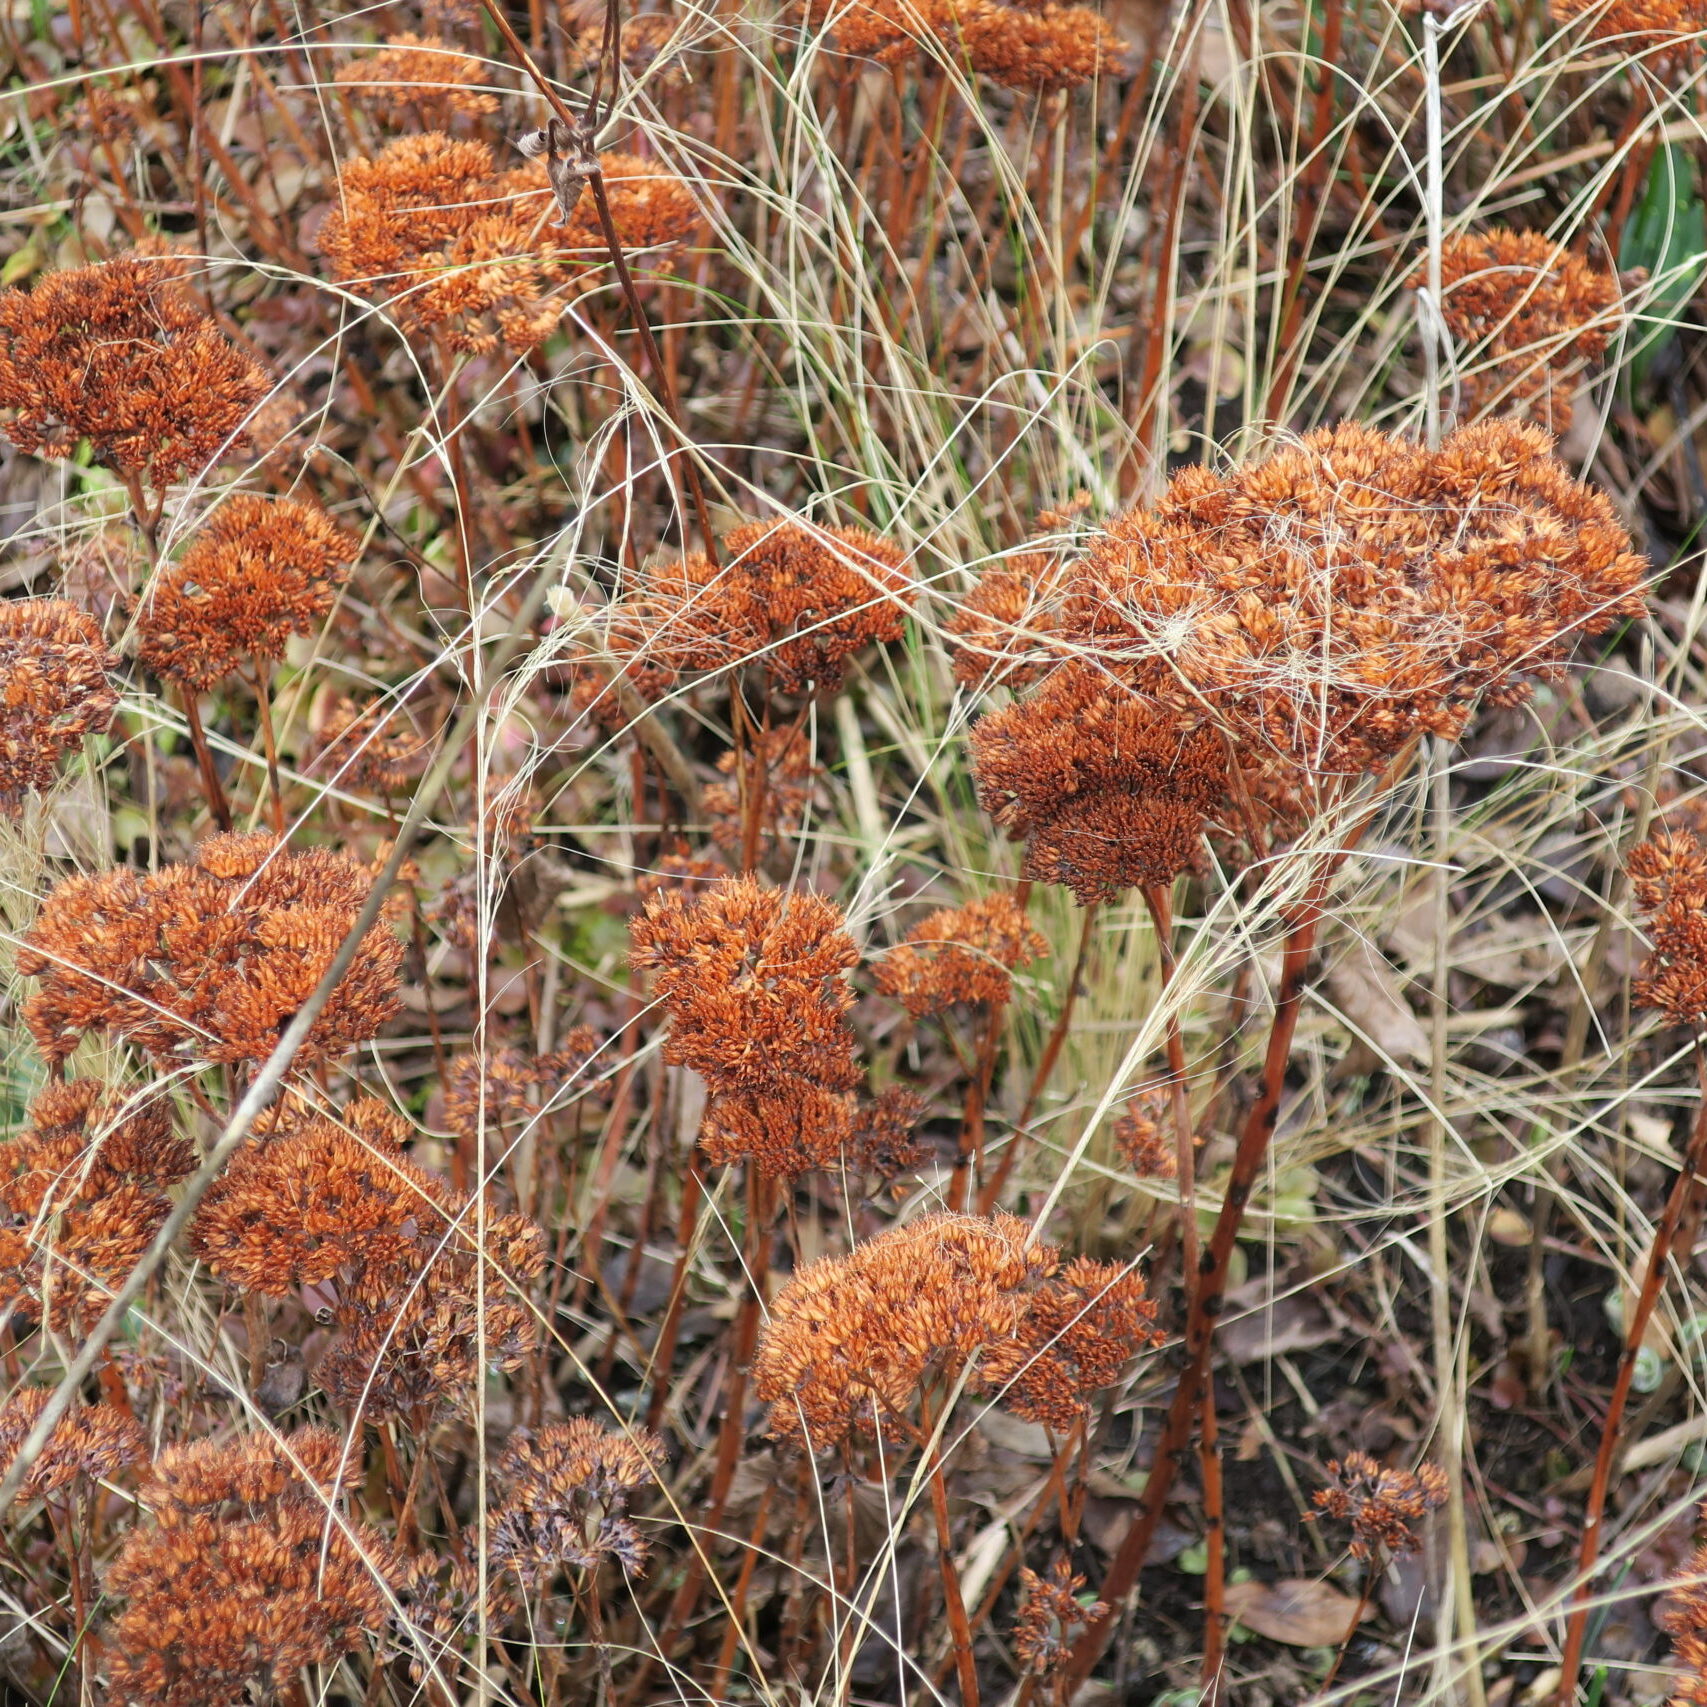 Seed heads and dormant grasses add winter beauty